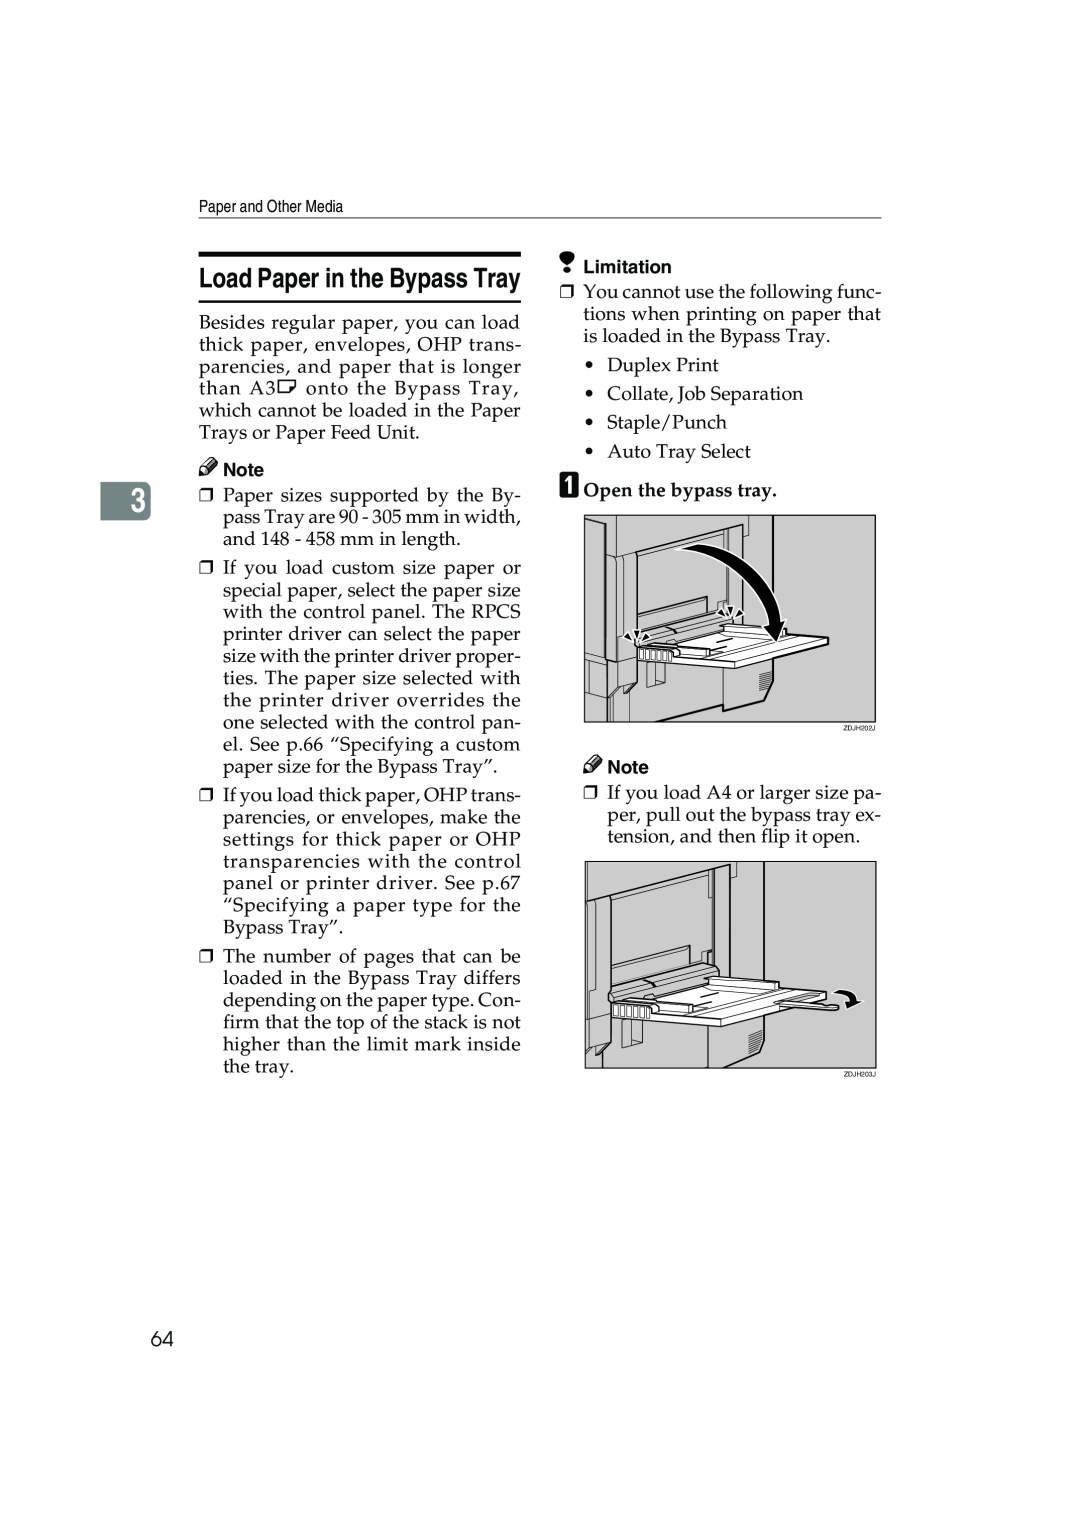 Ricoh AP3800C operating instructions Load Paper in the Bypass Tray, A Open the bypass tray 